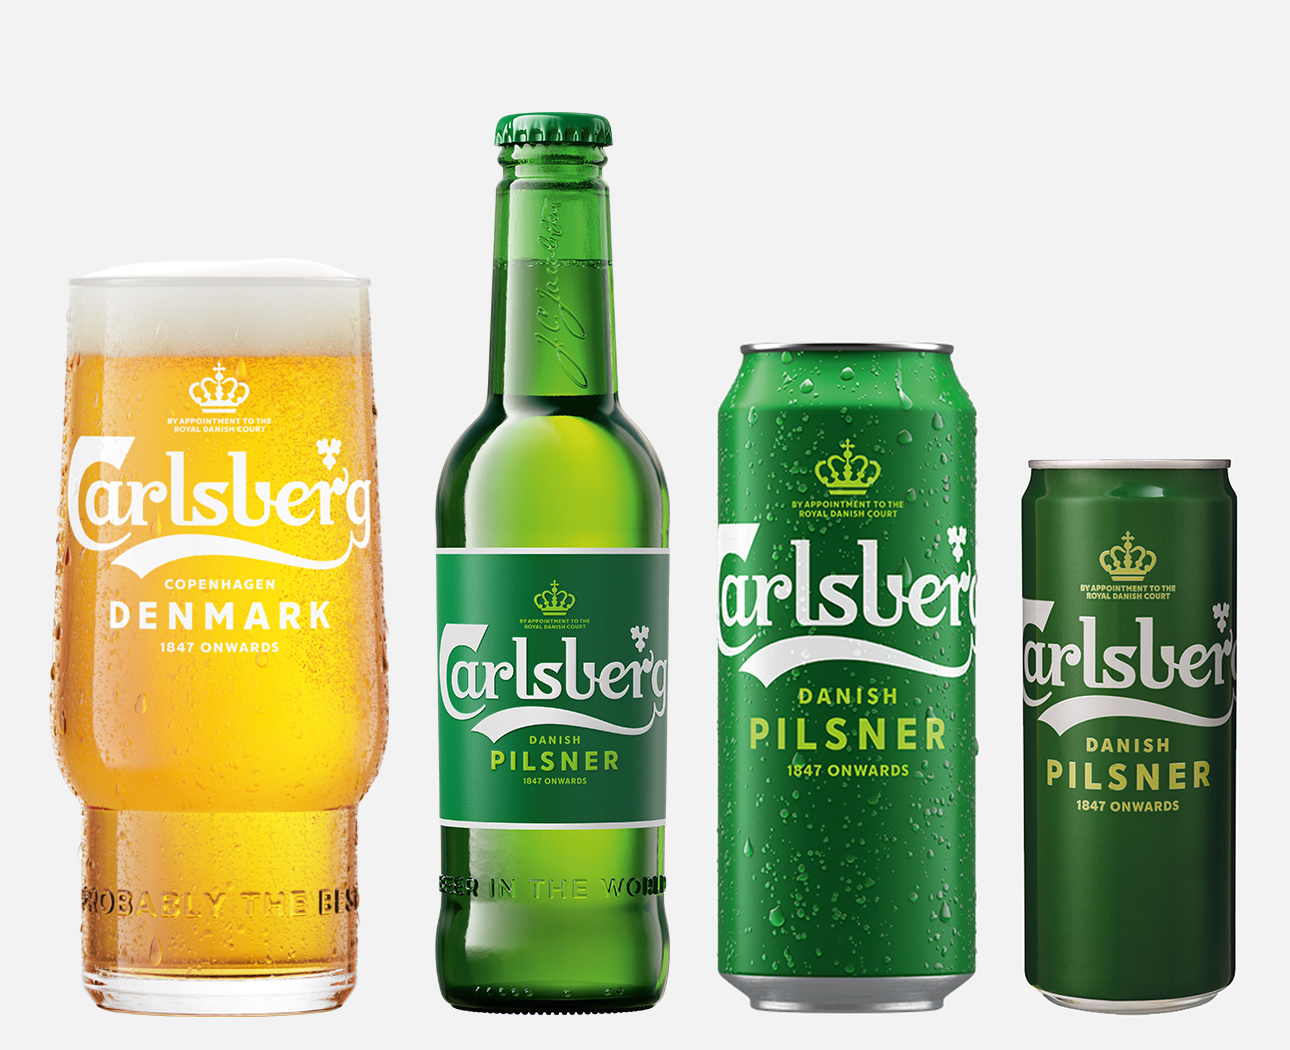 Carlsberg's containers